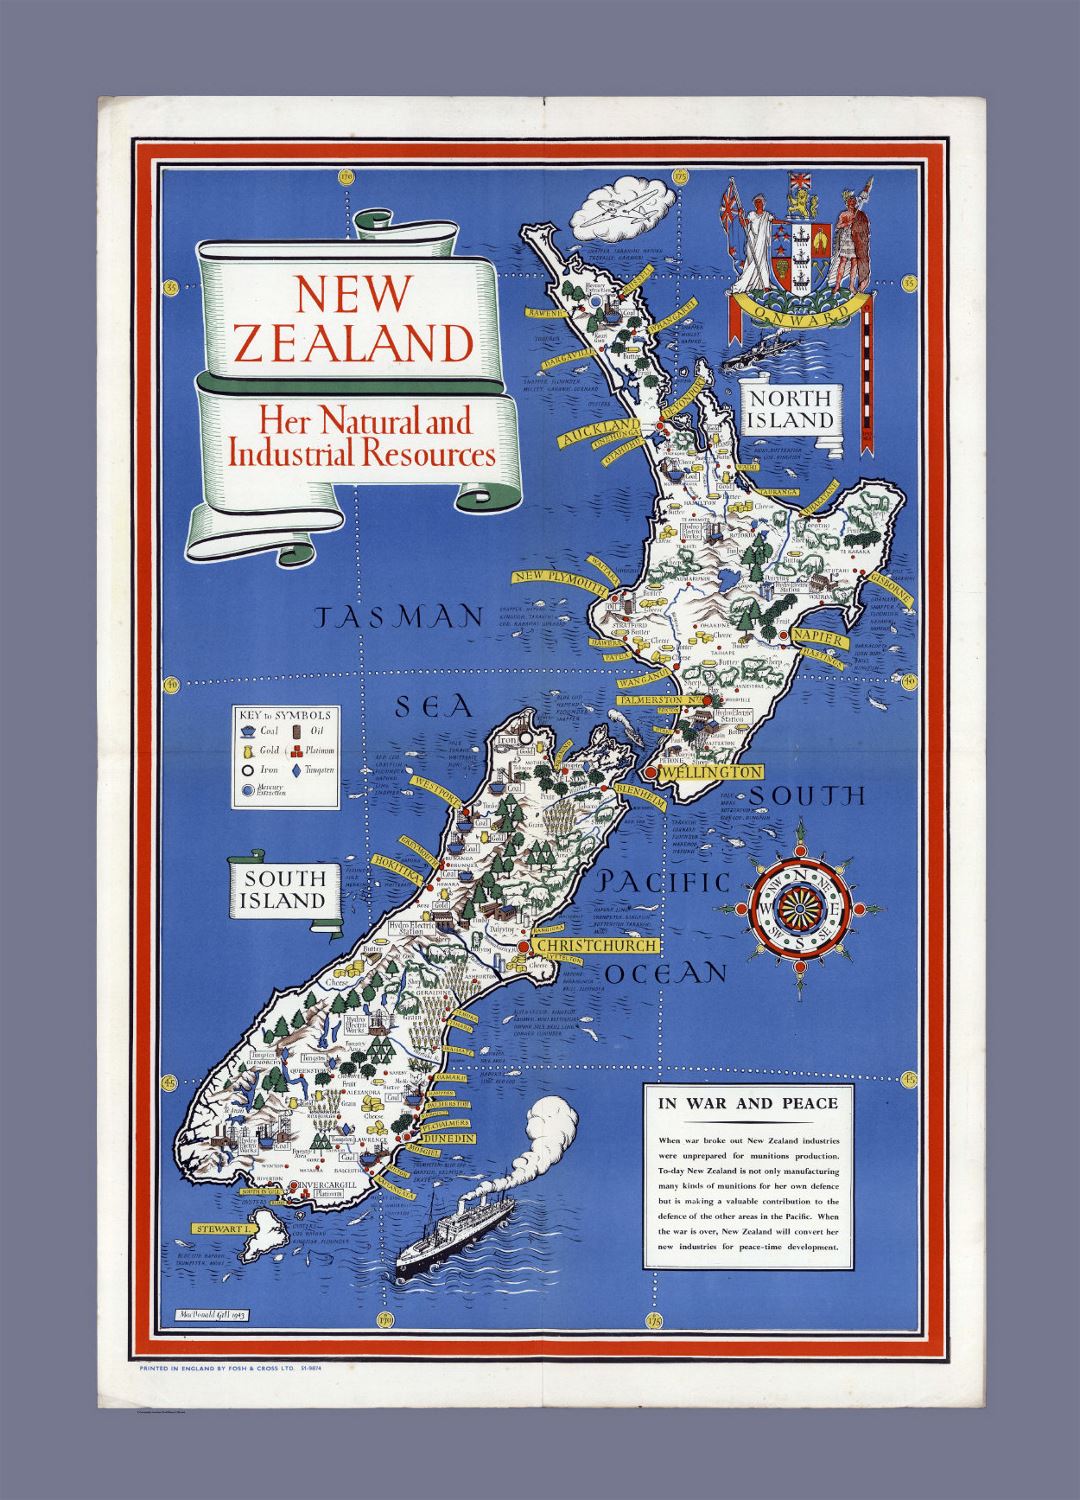 Detailed natural and industrial resources illustrated map of New Zealand